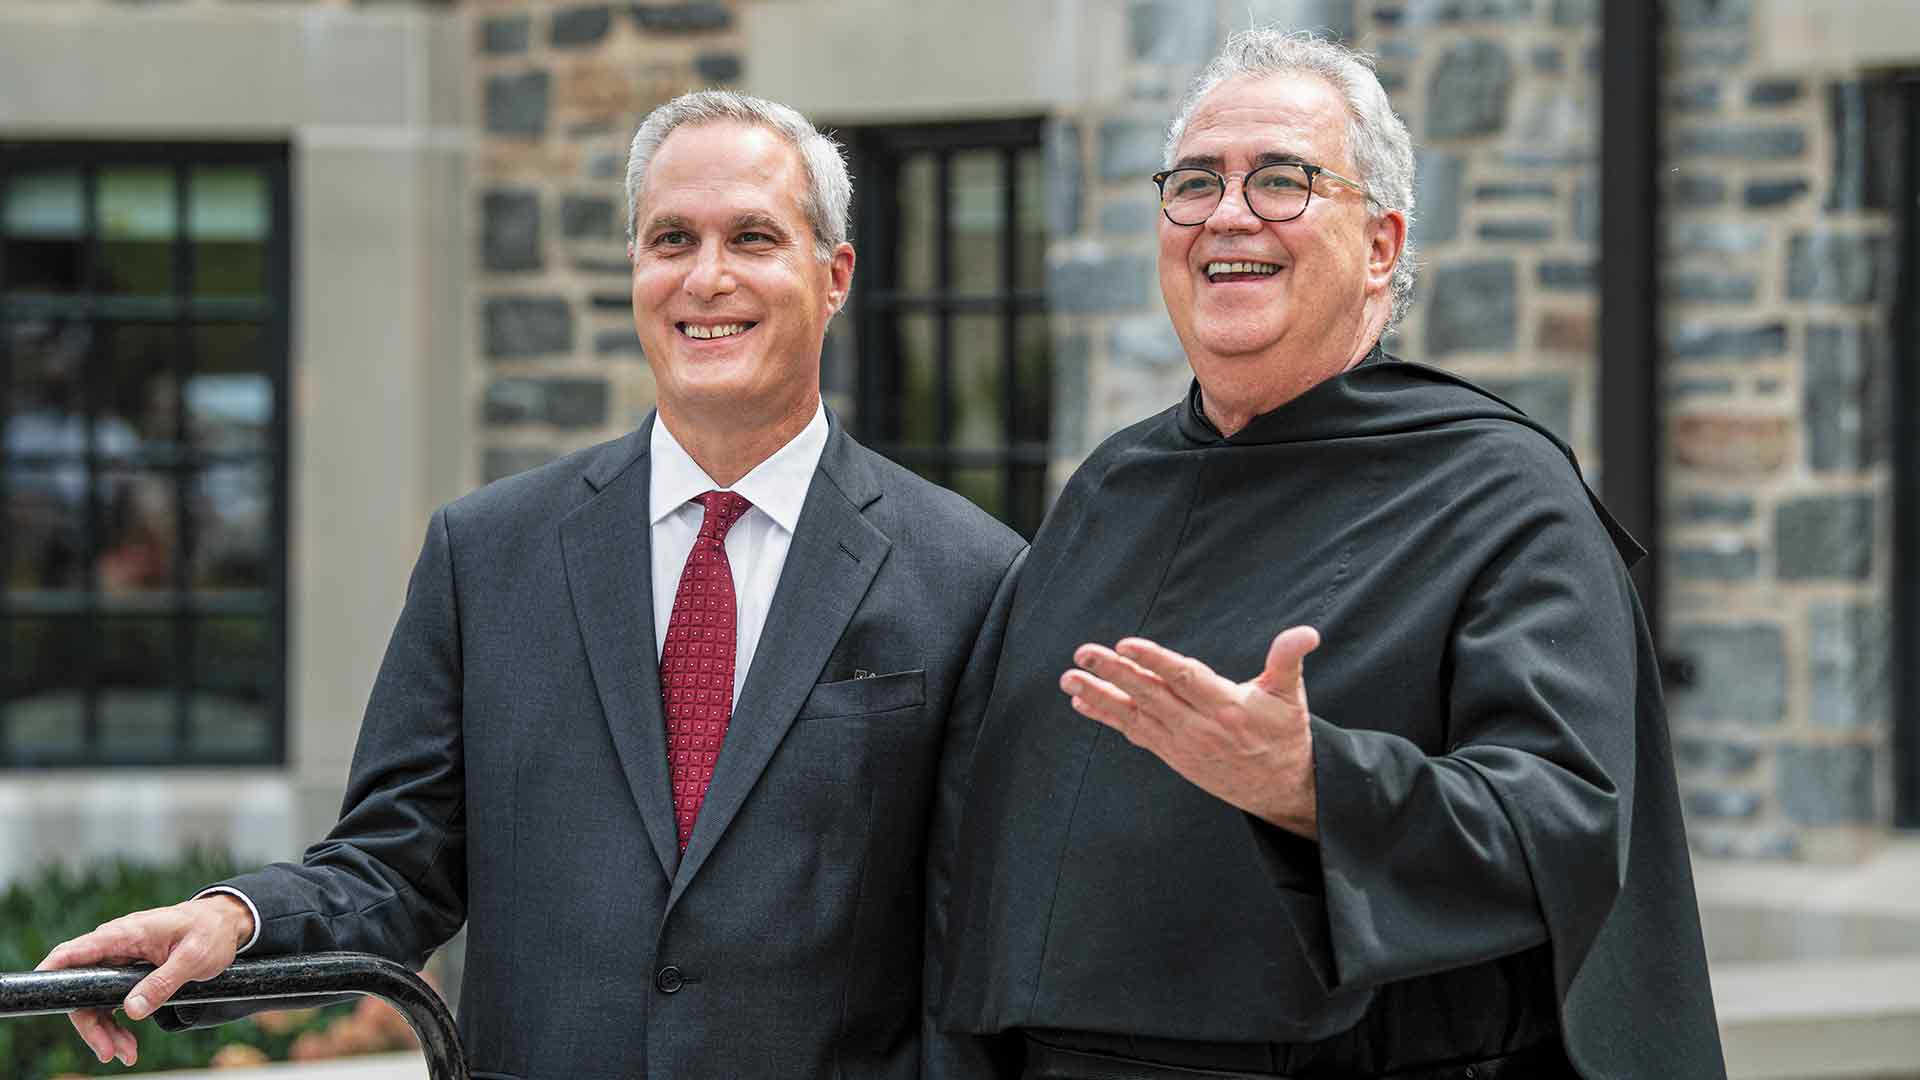 Ken Valosky with Father Peter Donohue standing before the Commons student housing